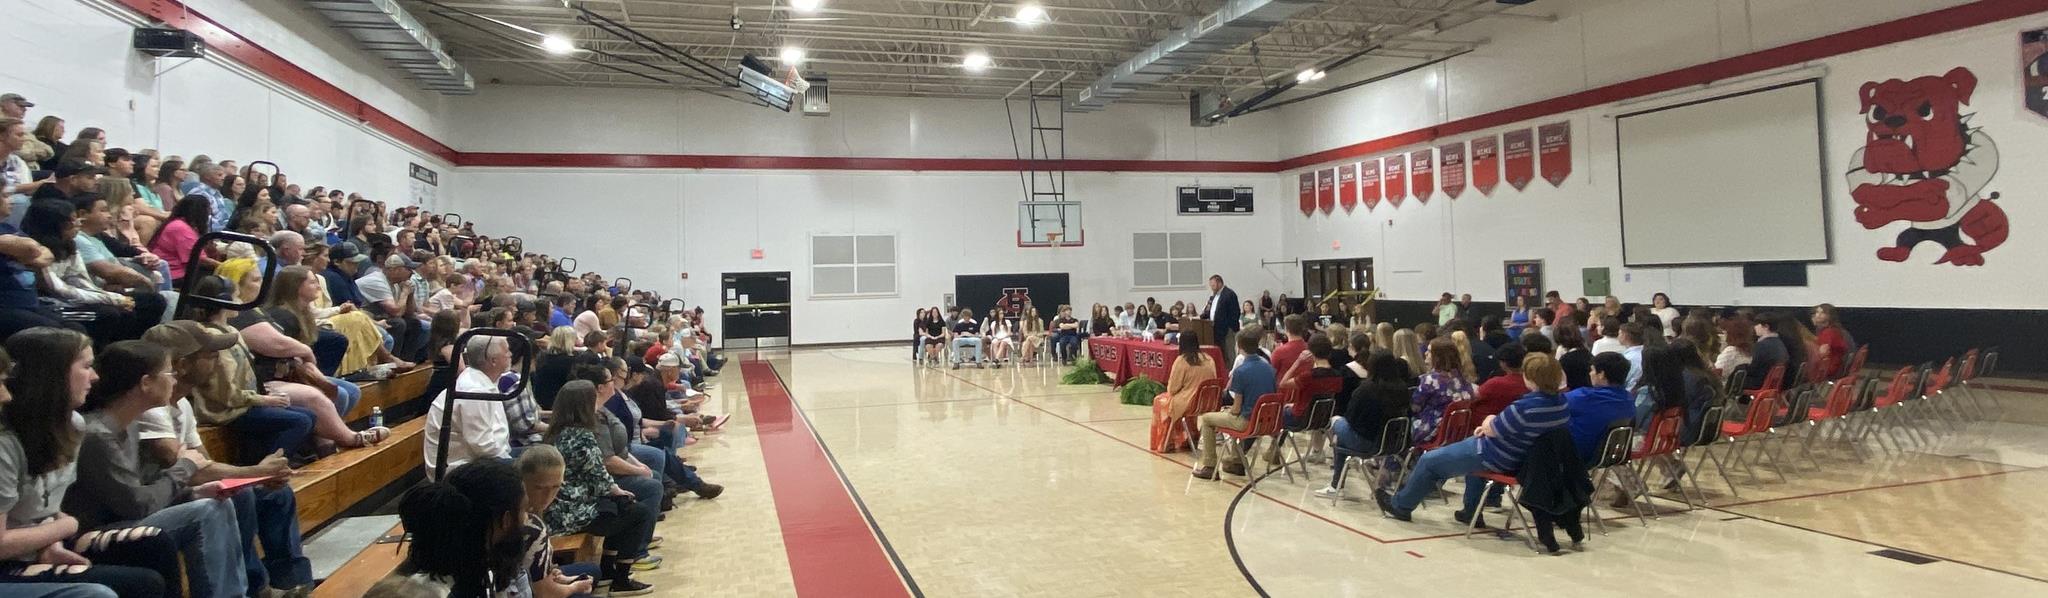 HCMS Awards day in the gym 